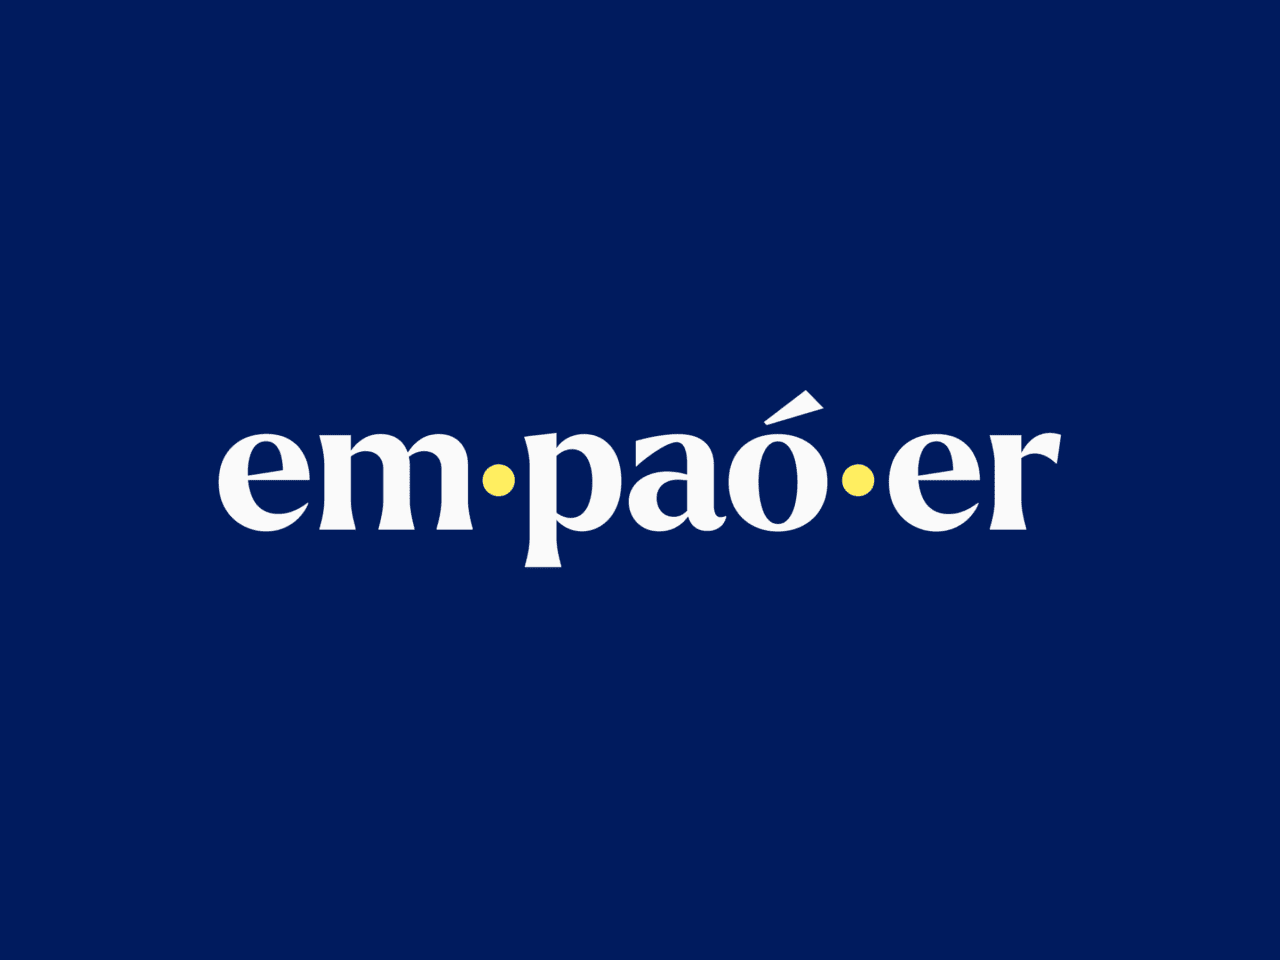 empaoer logo and main title: white serif font on deep blue with yellow accents